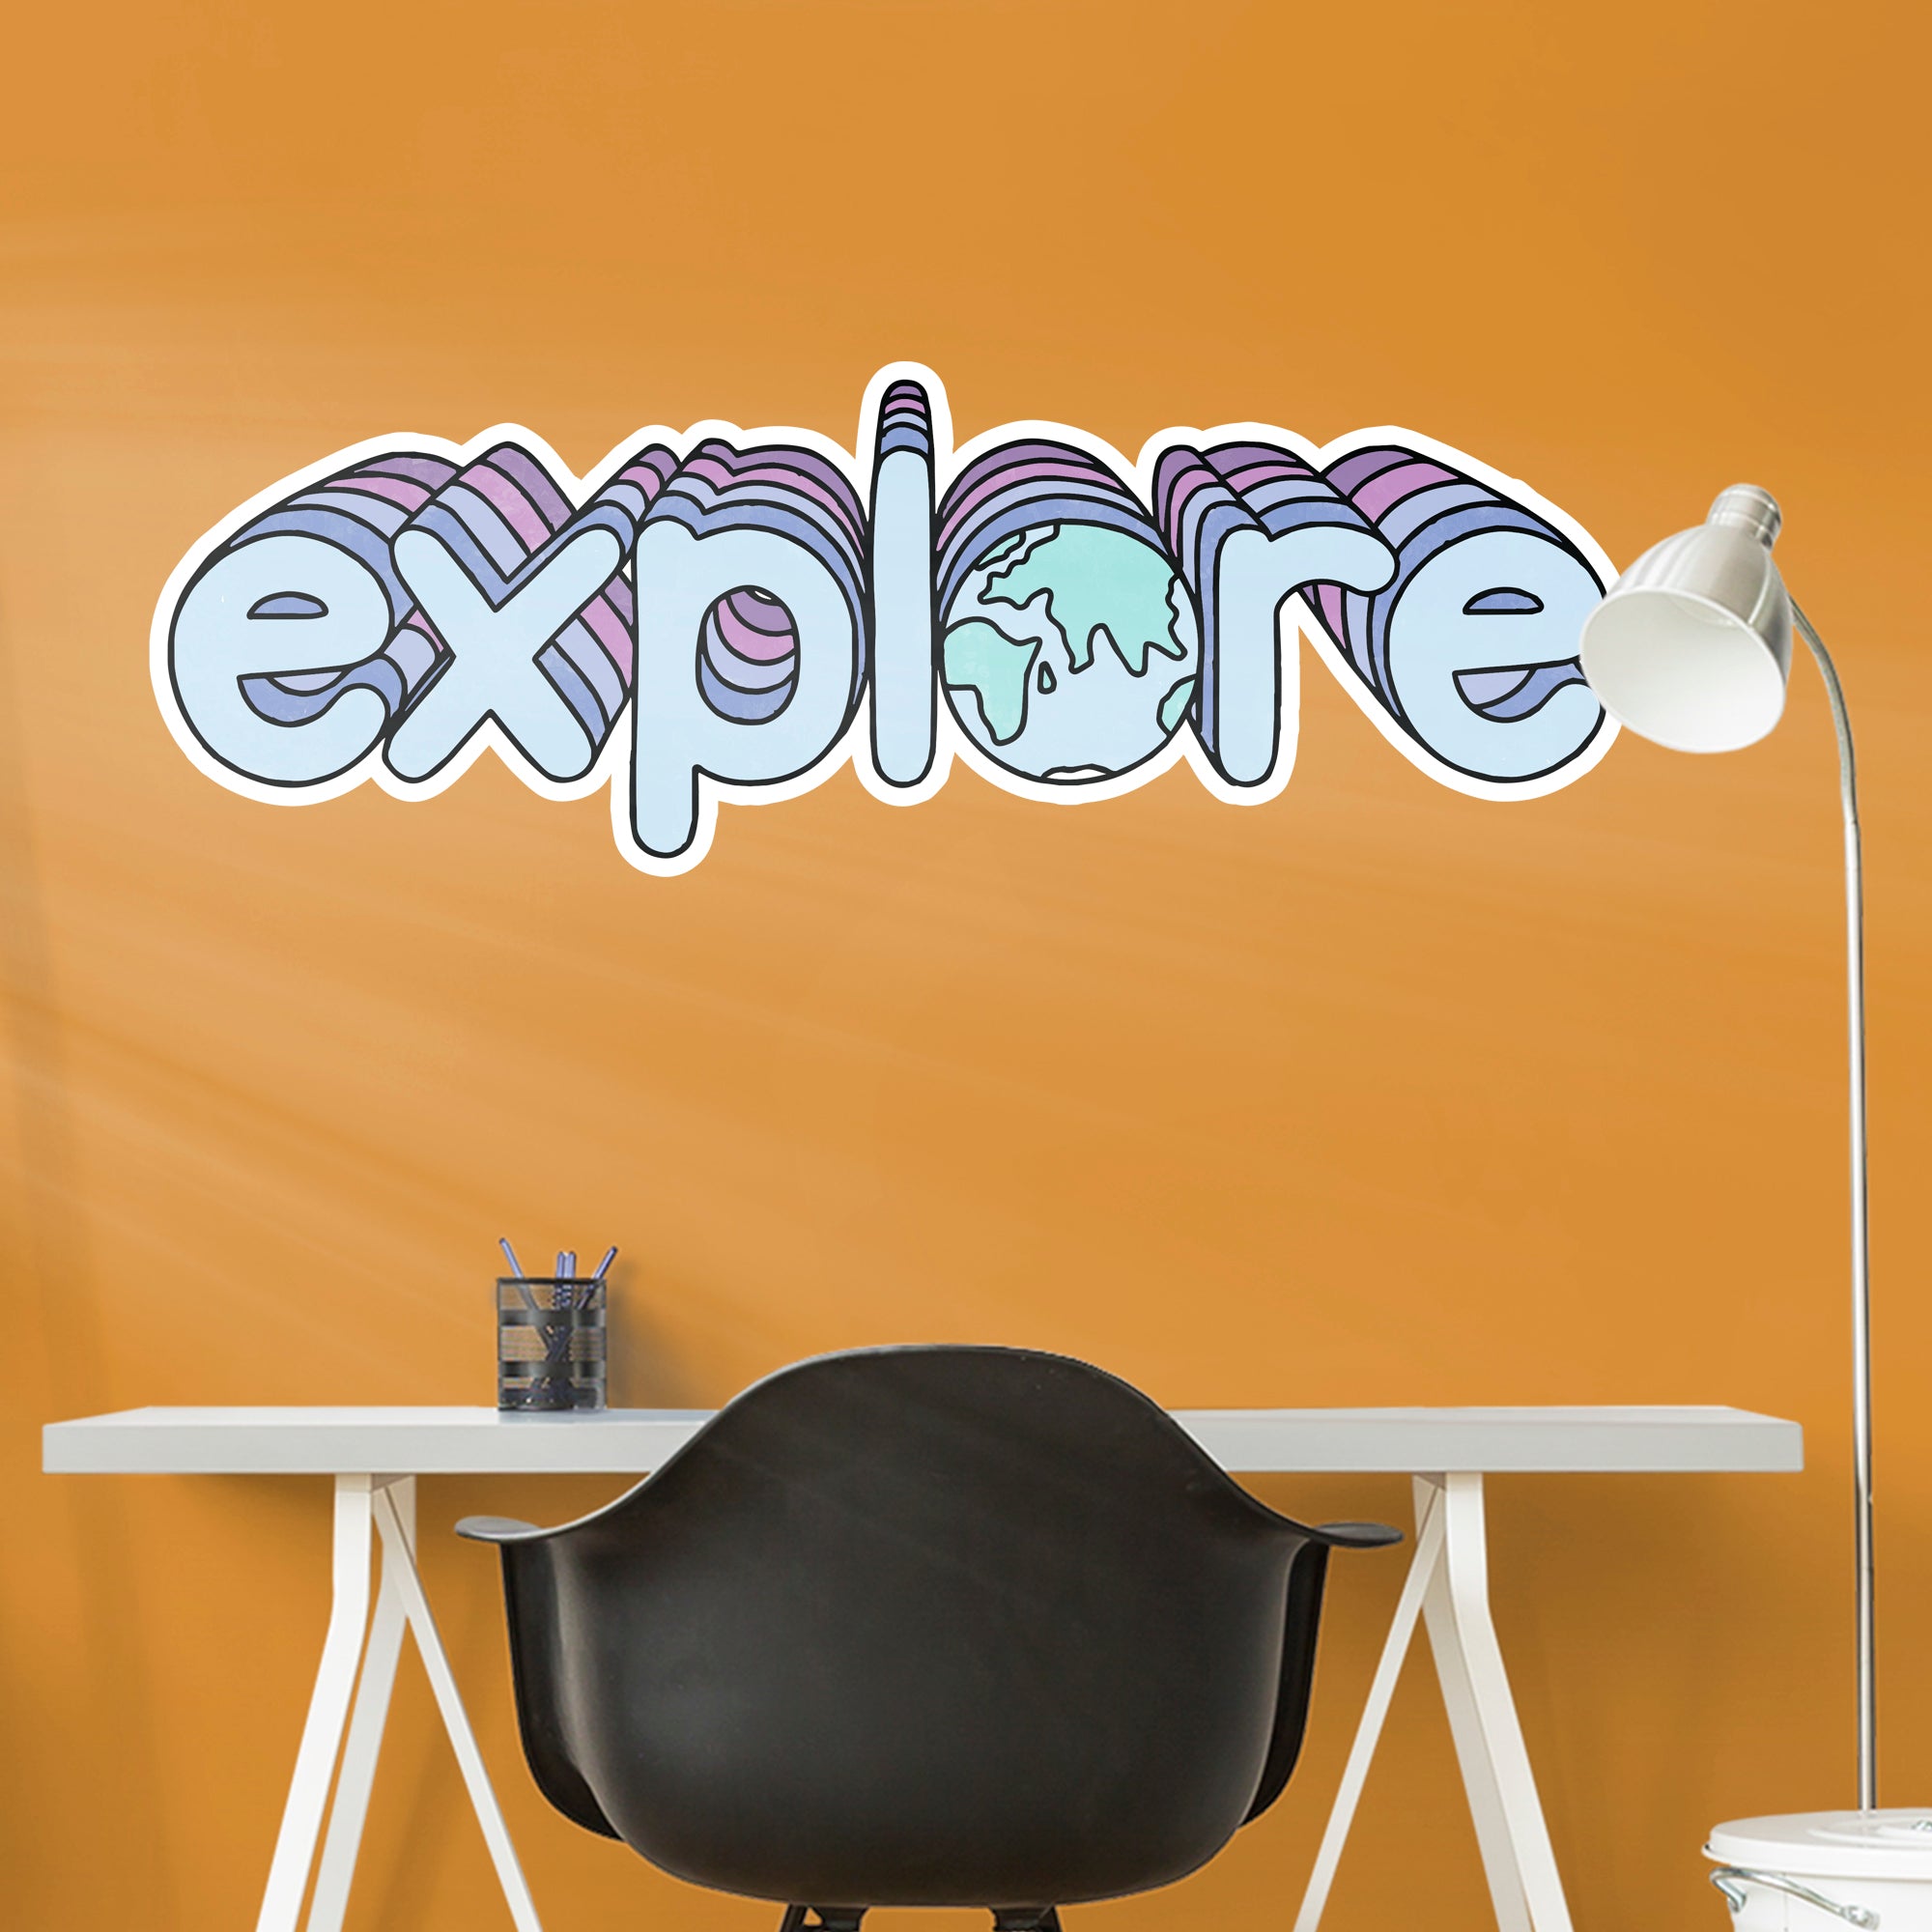 Explore - Officially Licensed Big Moods Removable Wall Decal Giant Decal (51"W x 18"H) by Fathead | Vinyl